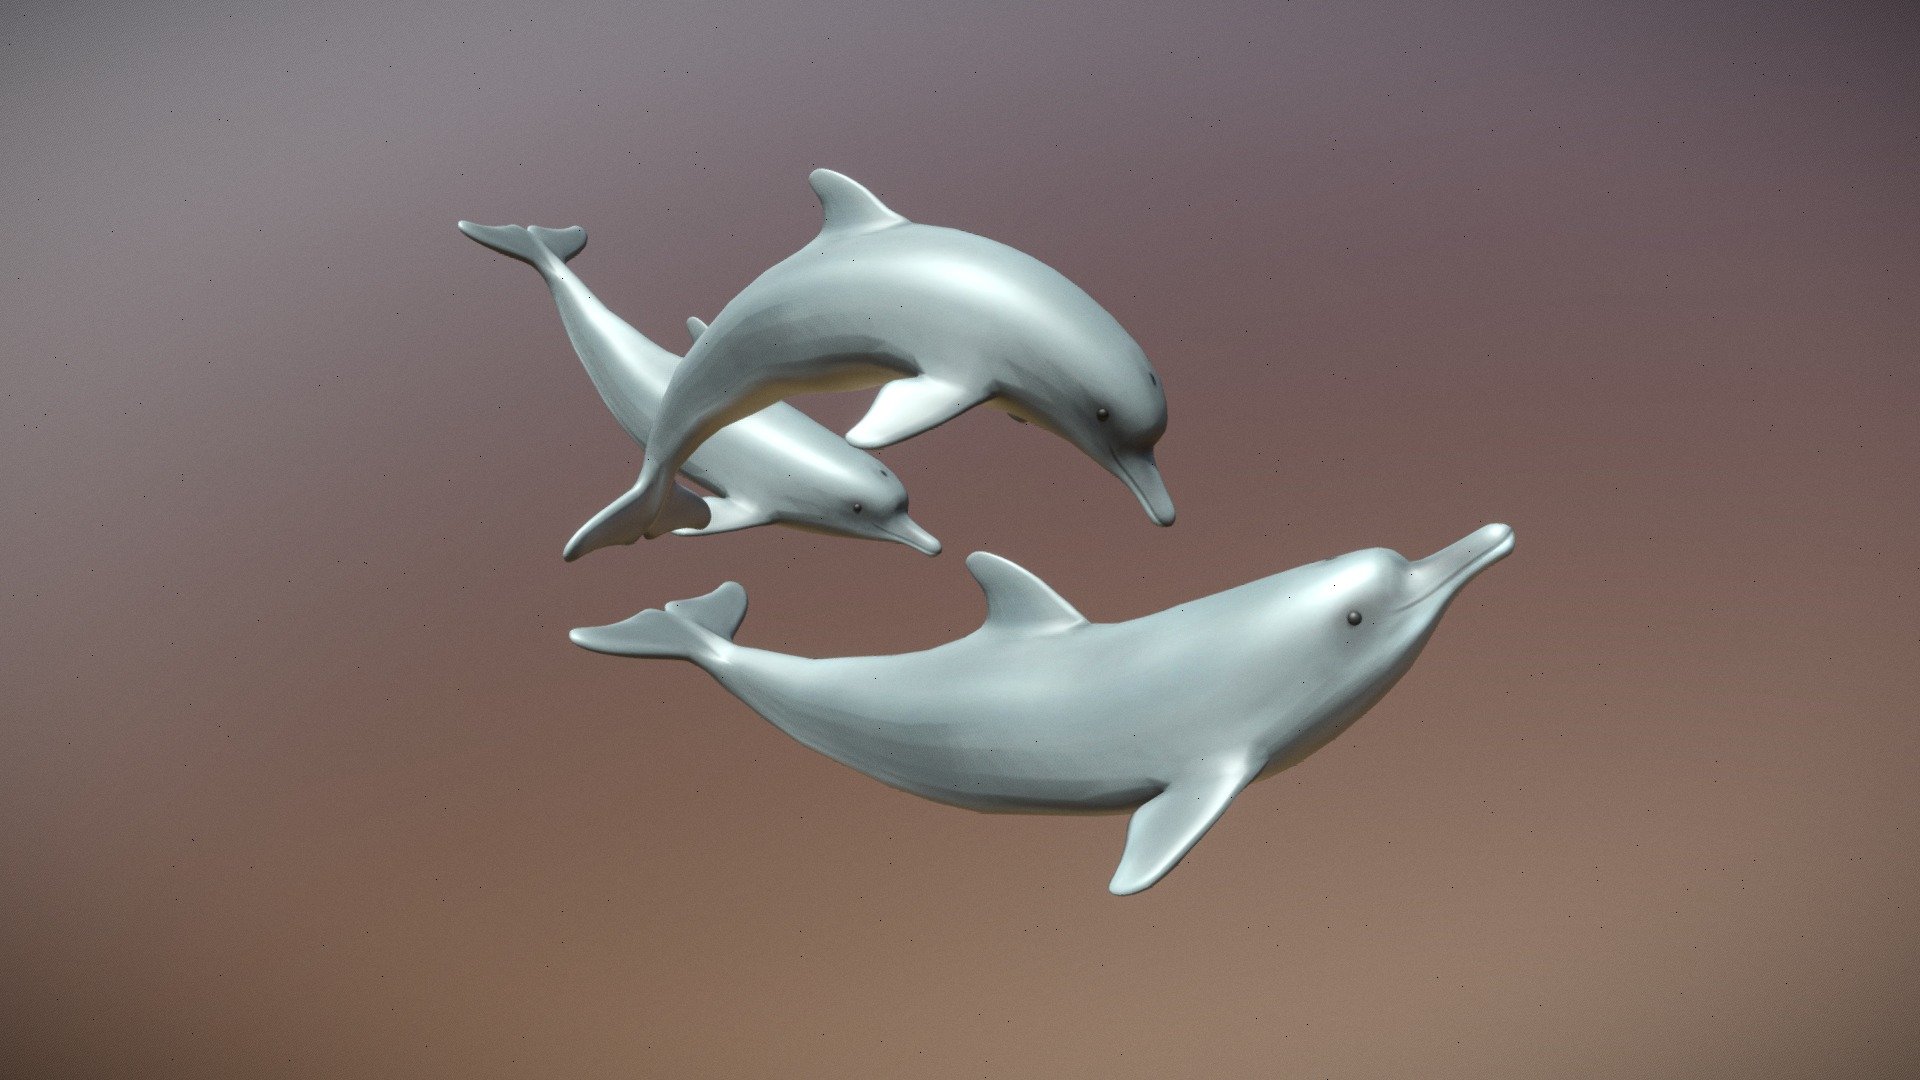 Low poly exercise with Blender. 
3D Artist for video games - IDP
Verona, Italy - Dolphins - Buy Royalty Free 3D model by chiara.dalfior 3d model